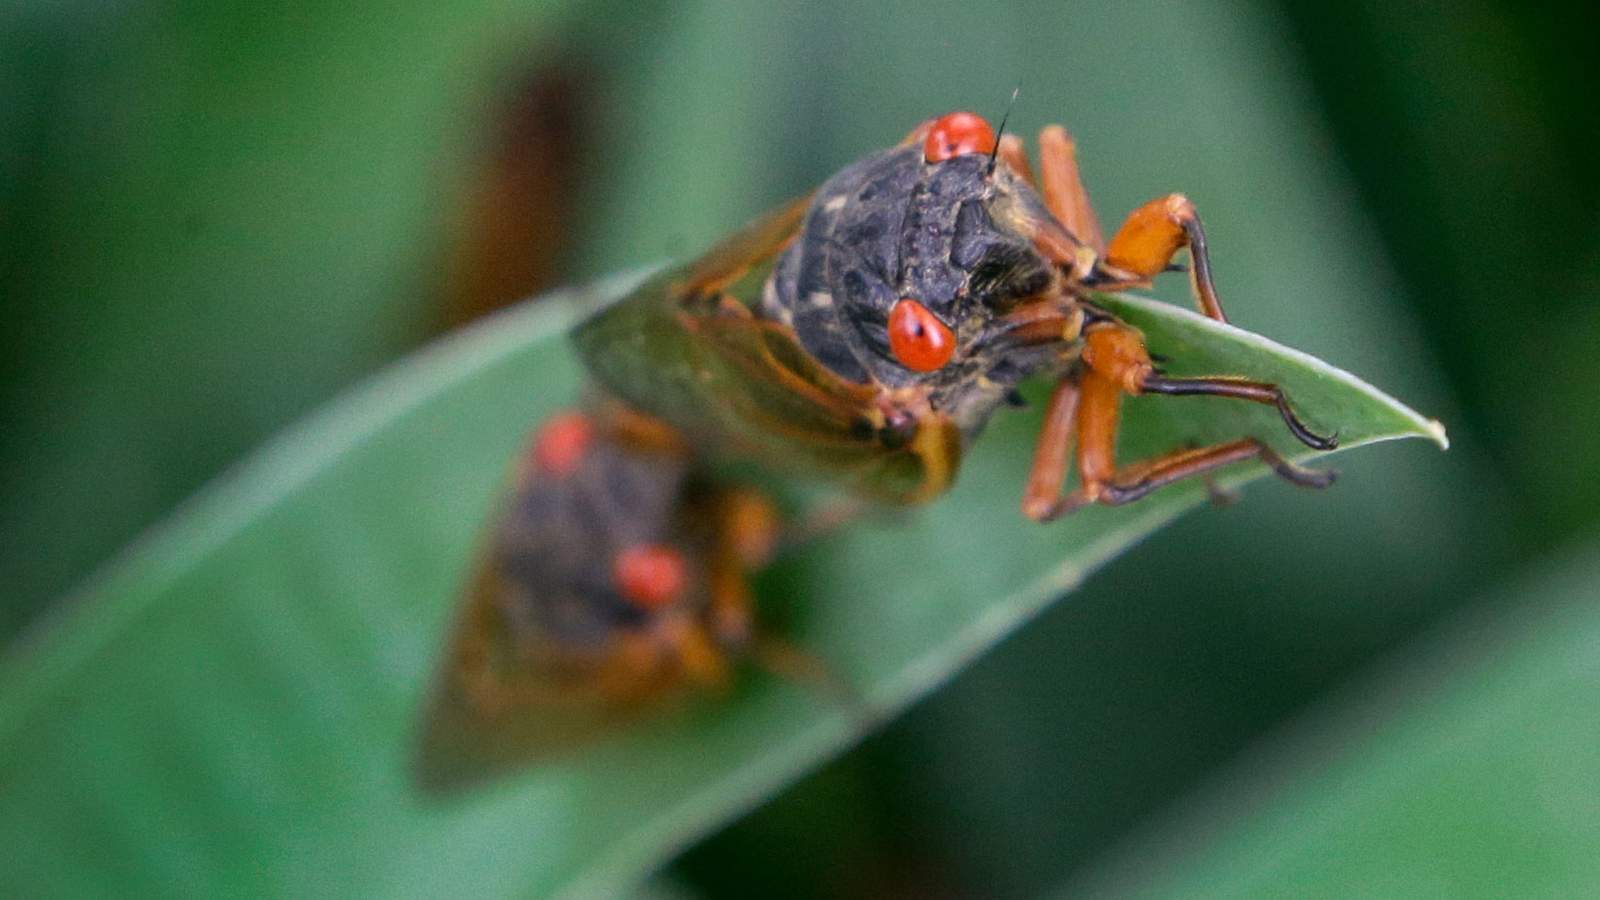 Cicadas are coming! Brood X to emerge in Lynchburg this month